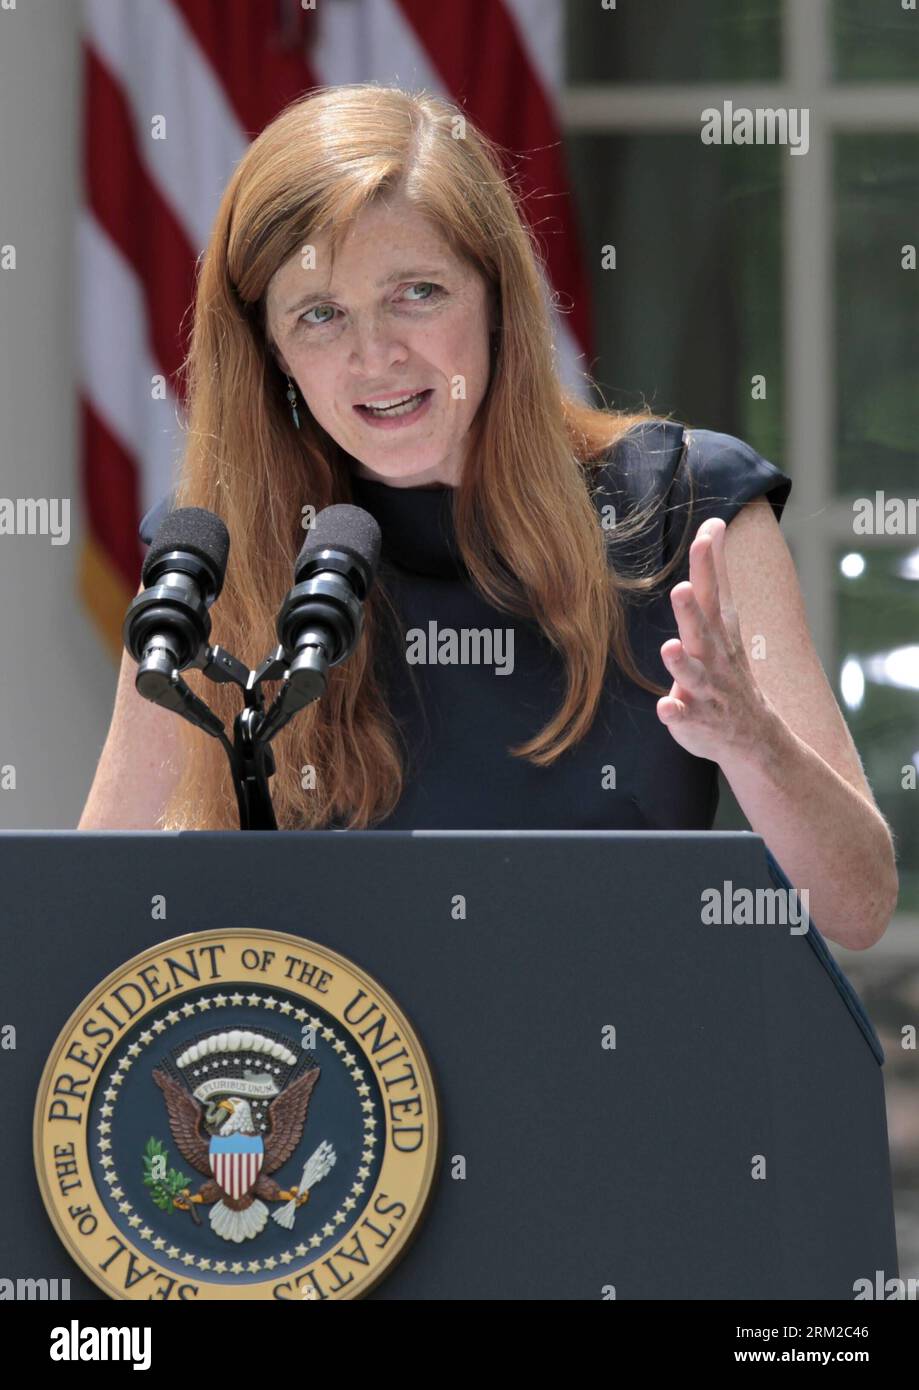 Bildnummer: 59781734  Datum: 05.06.2013  Copyright: imago/Xinhua (130605) -- WASHINGTON D.C., June 5, 2013 (Xinhua) -- Samantha Power, nominated to be the next US Ambassador to the United Nations, speaks during a White House ceremony in Washington D.C., the United States, June 5, 2013. U.S. President Barack Obama on Wednesday tapped UN ambassador Susan Rice to be the next national security advisor, taking the post vacated by Tom Donilon, who has resigned. (Xinhua/Fang Zhe) US-WASHINGTON-POLITICS-OBAMA-RICE PUBLICATIONxNOTxINxCHN People Politik USA premiumd x0x xmb 2013 hoch      59781734 Date Stock Photo